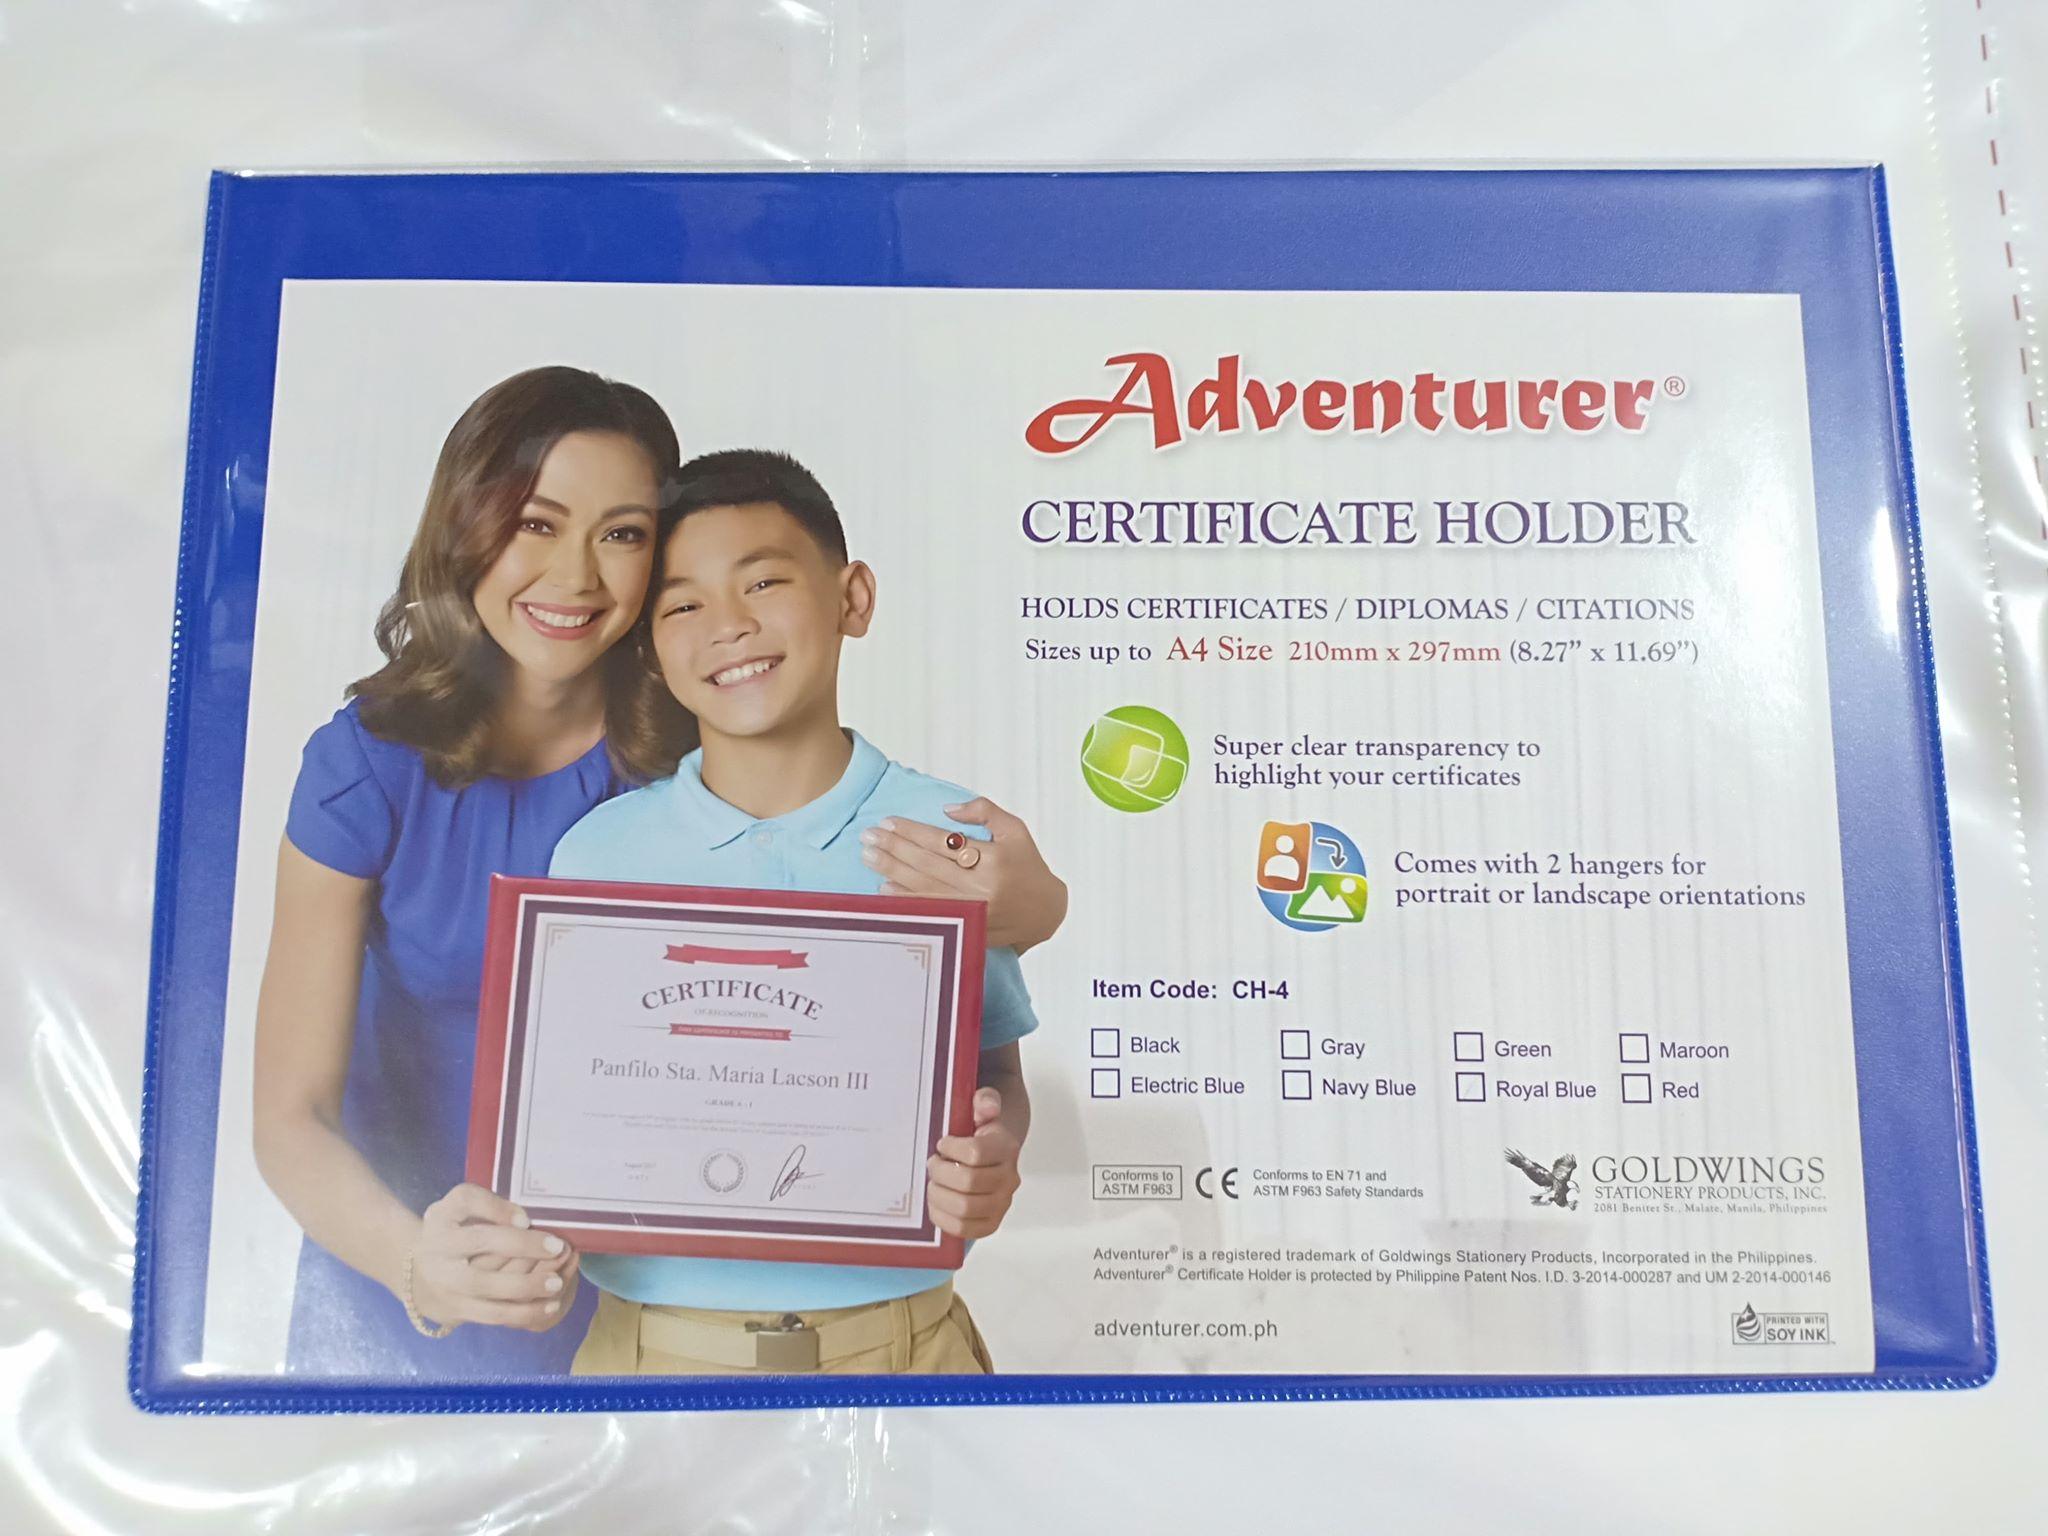 adventurer-certificate-holder-diploma-holder-a4-size-8-27-x-11-69-by